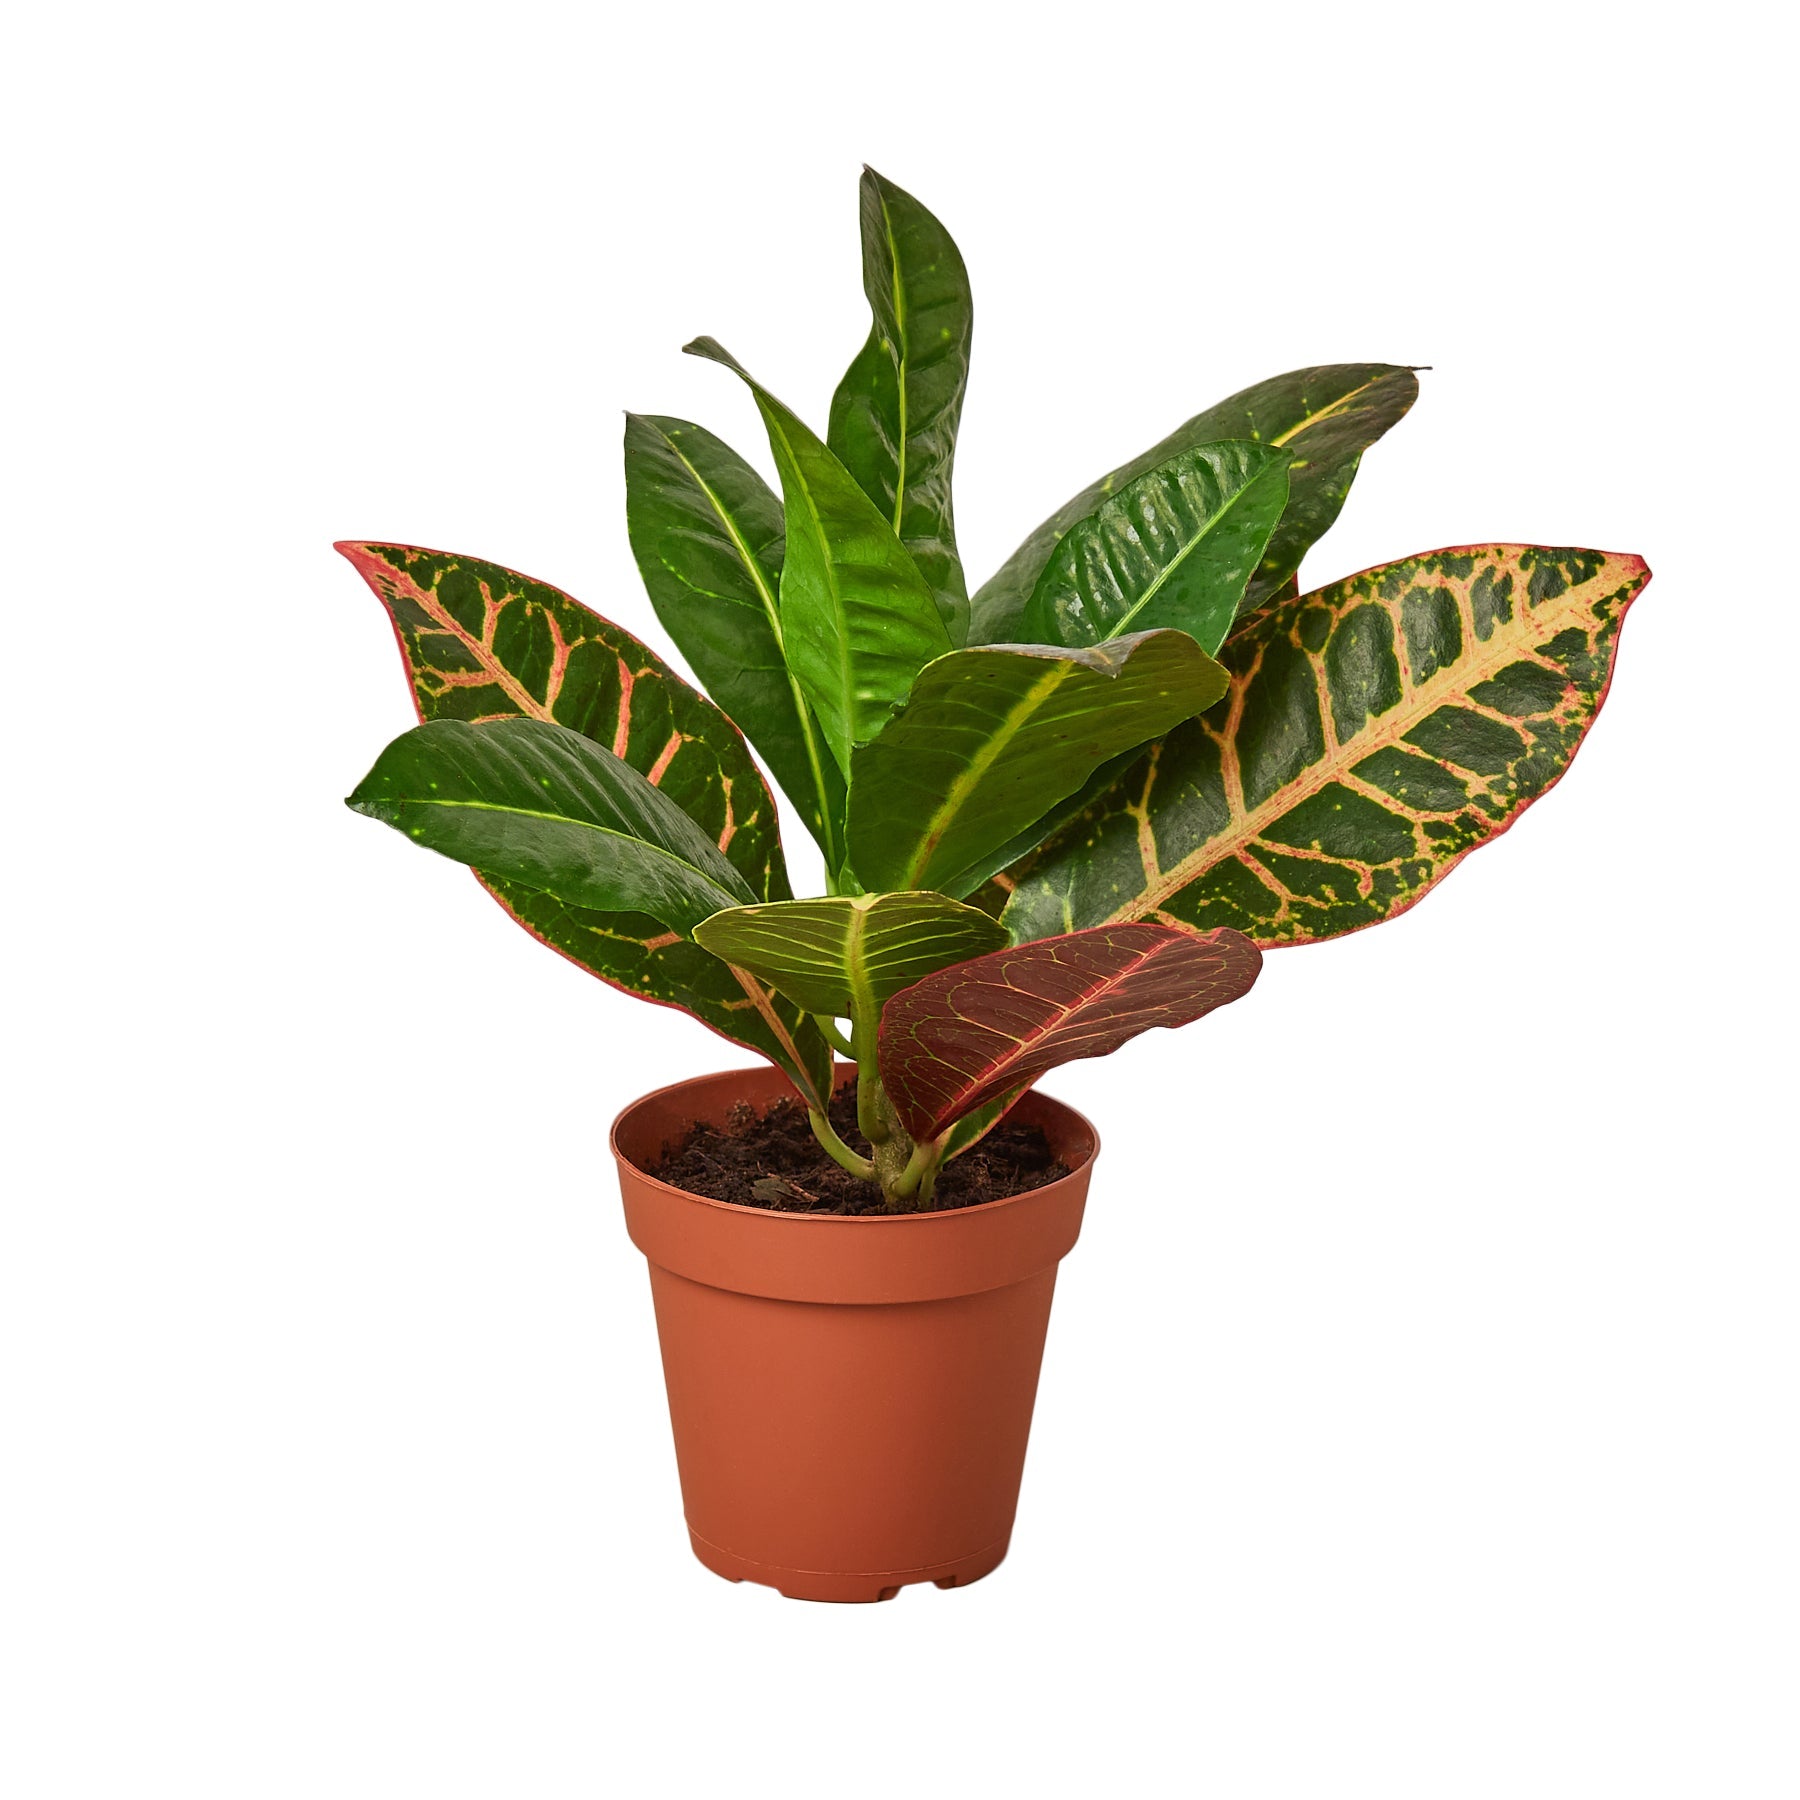 Looking for the top plant nurseries near me to find the perfect potted plant with red and green leaves? Look no further!